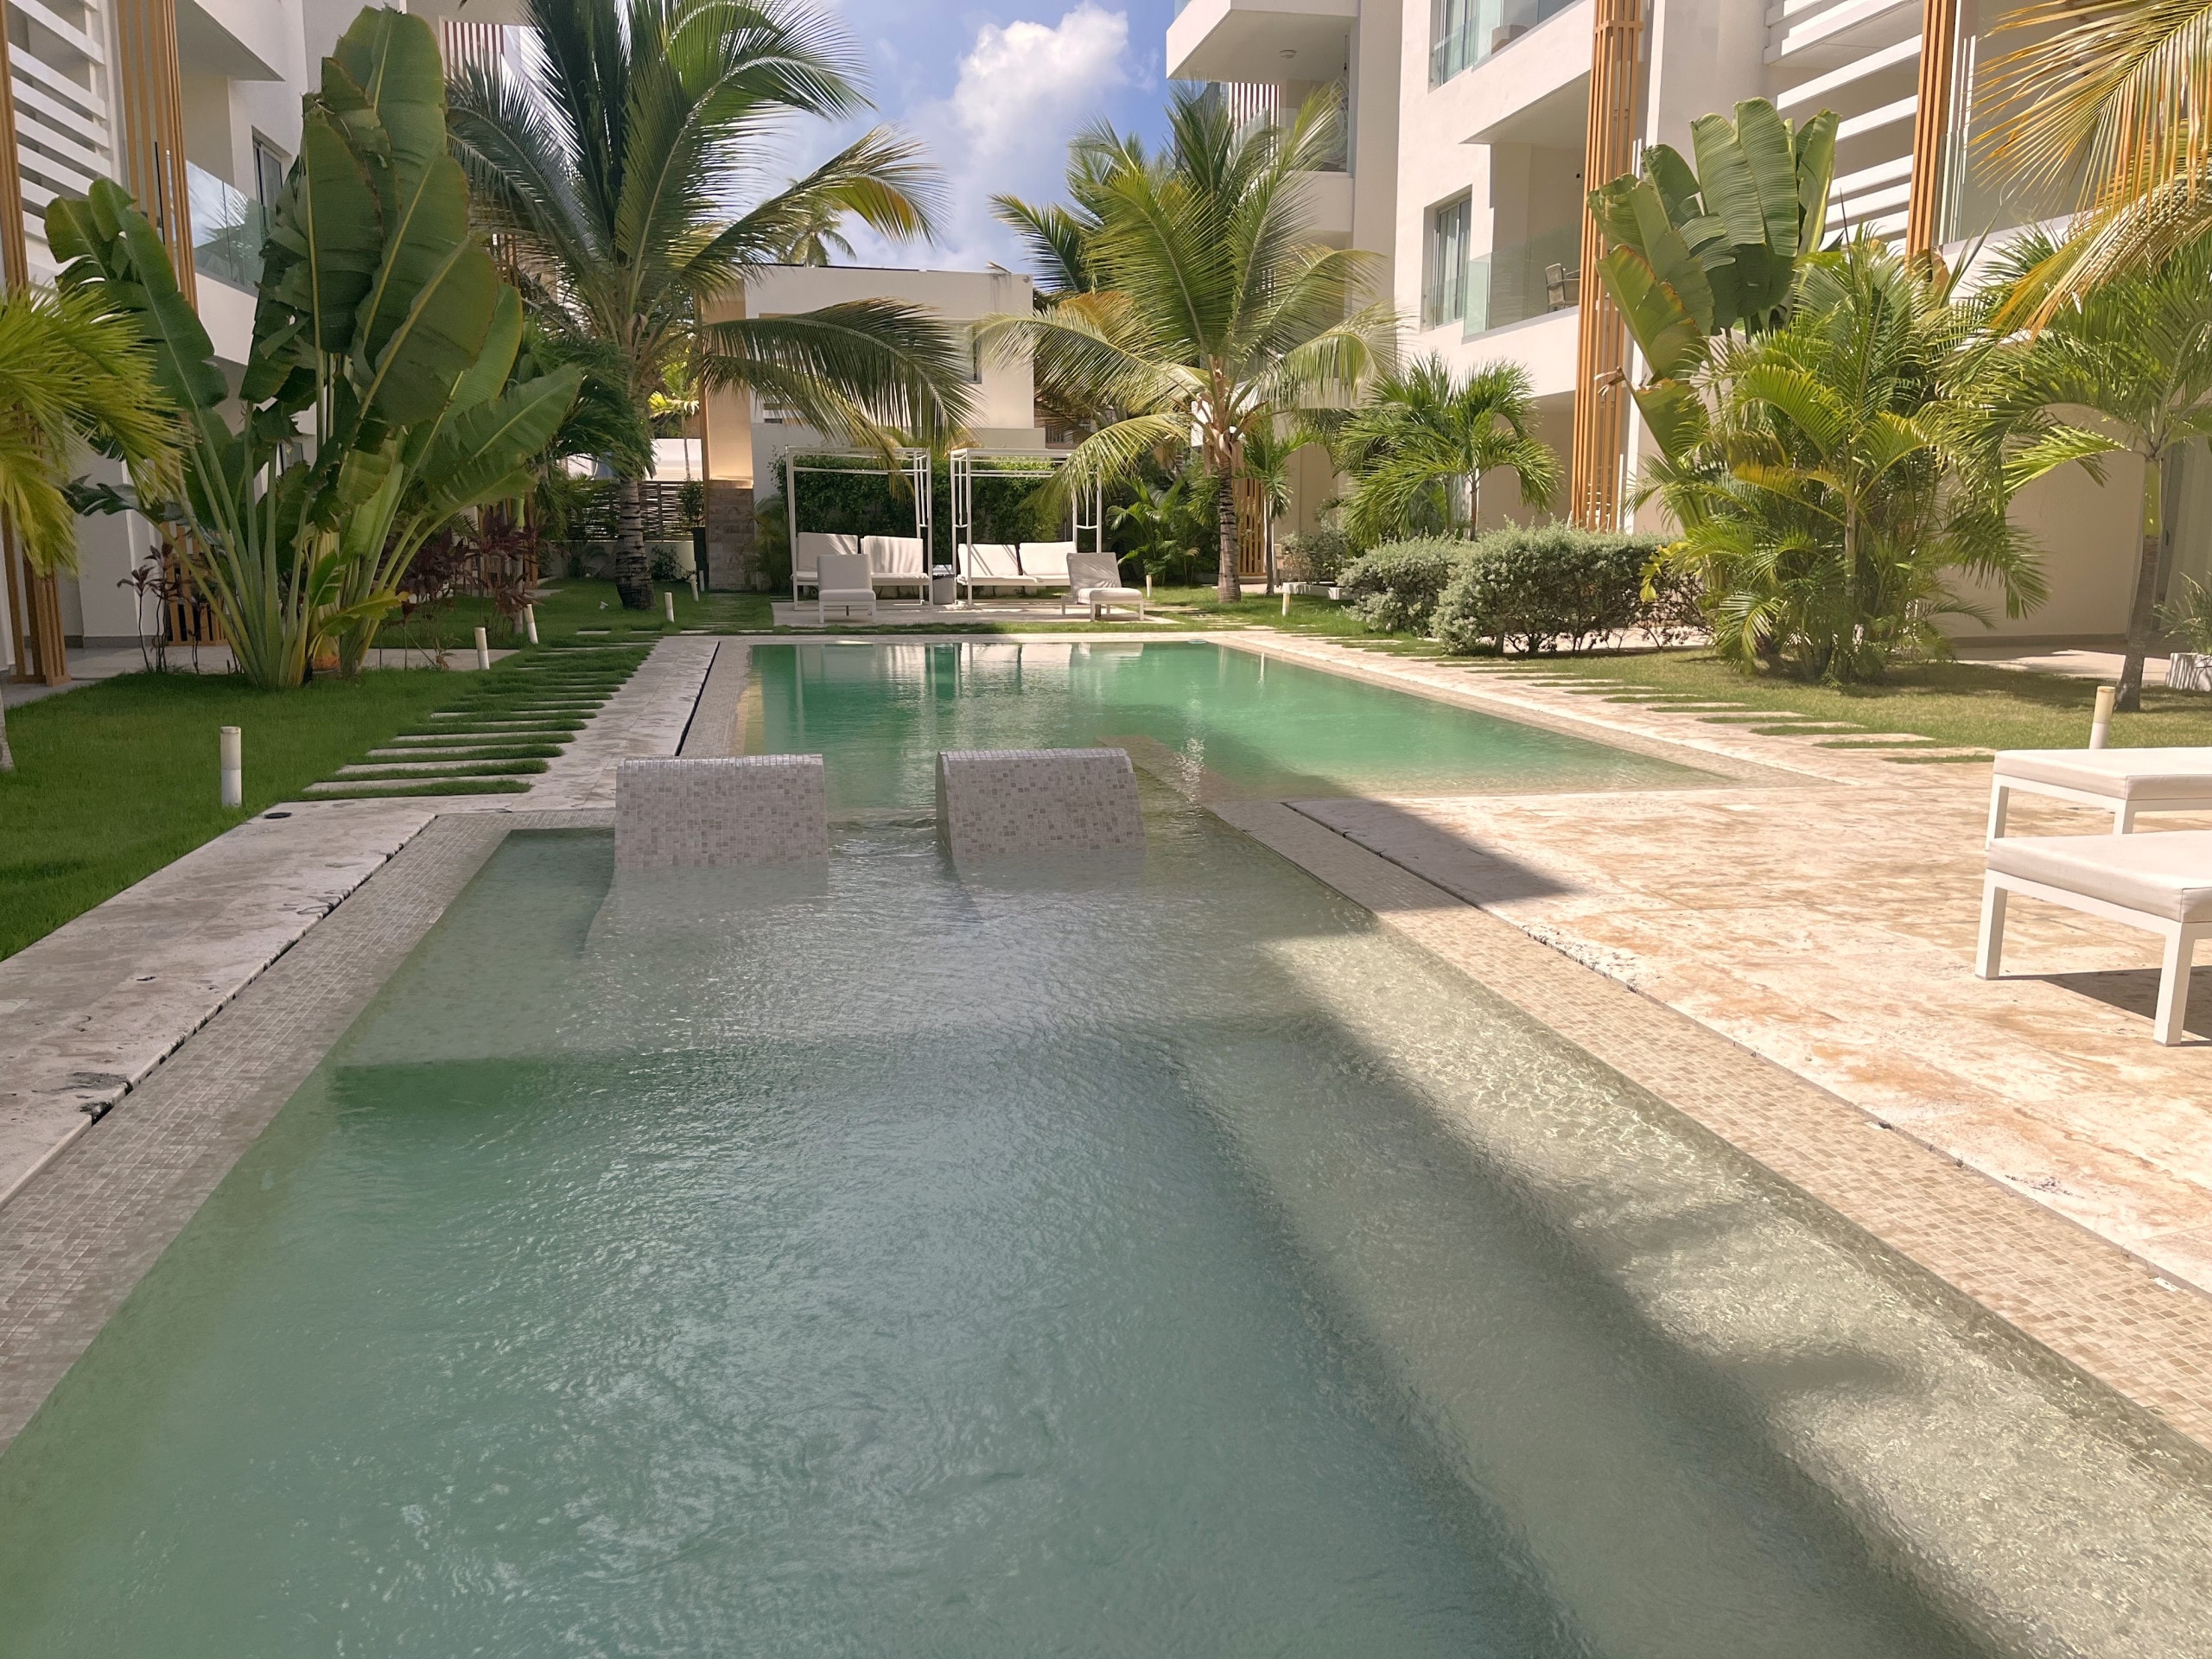 Property Image 2 - Luxurious condo steps from the beach. F1. Los Corales Beach